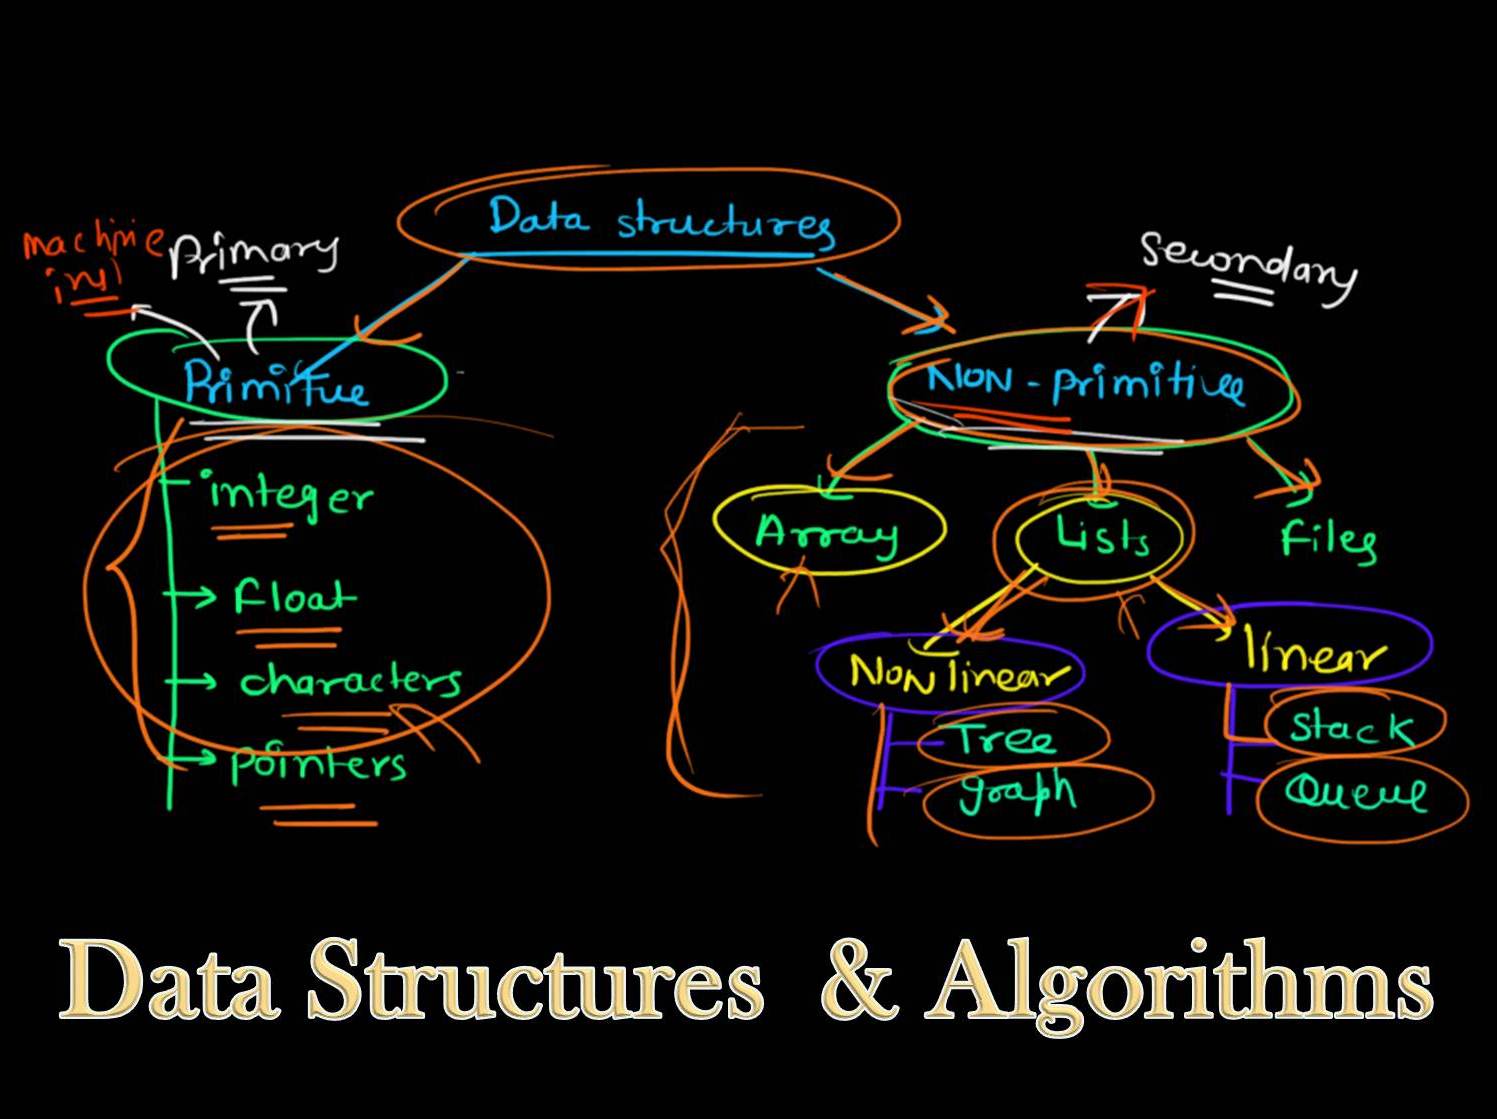 http://study.aisectonline.com/images/Data Structures and Algorithms.jpg